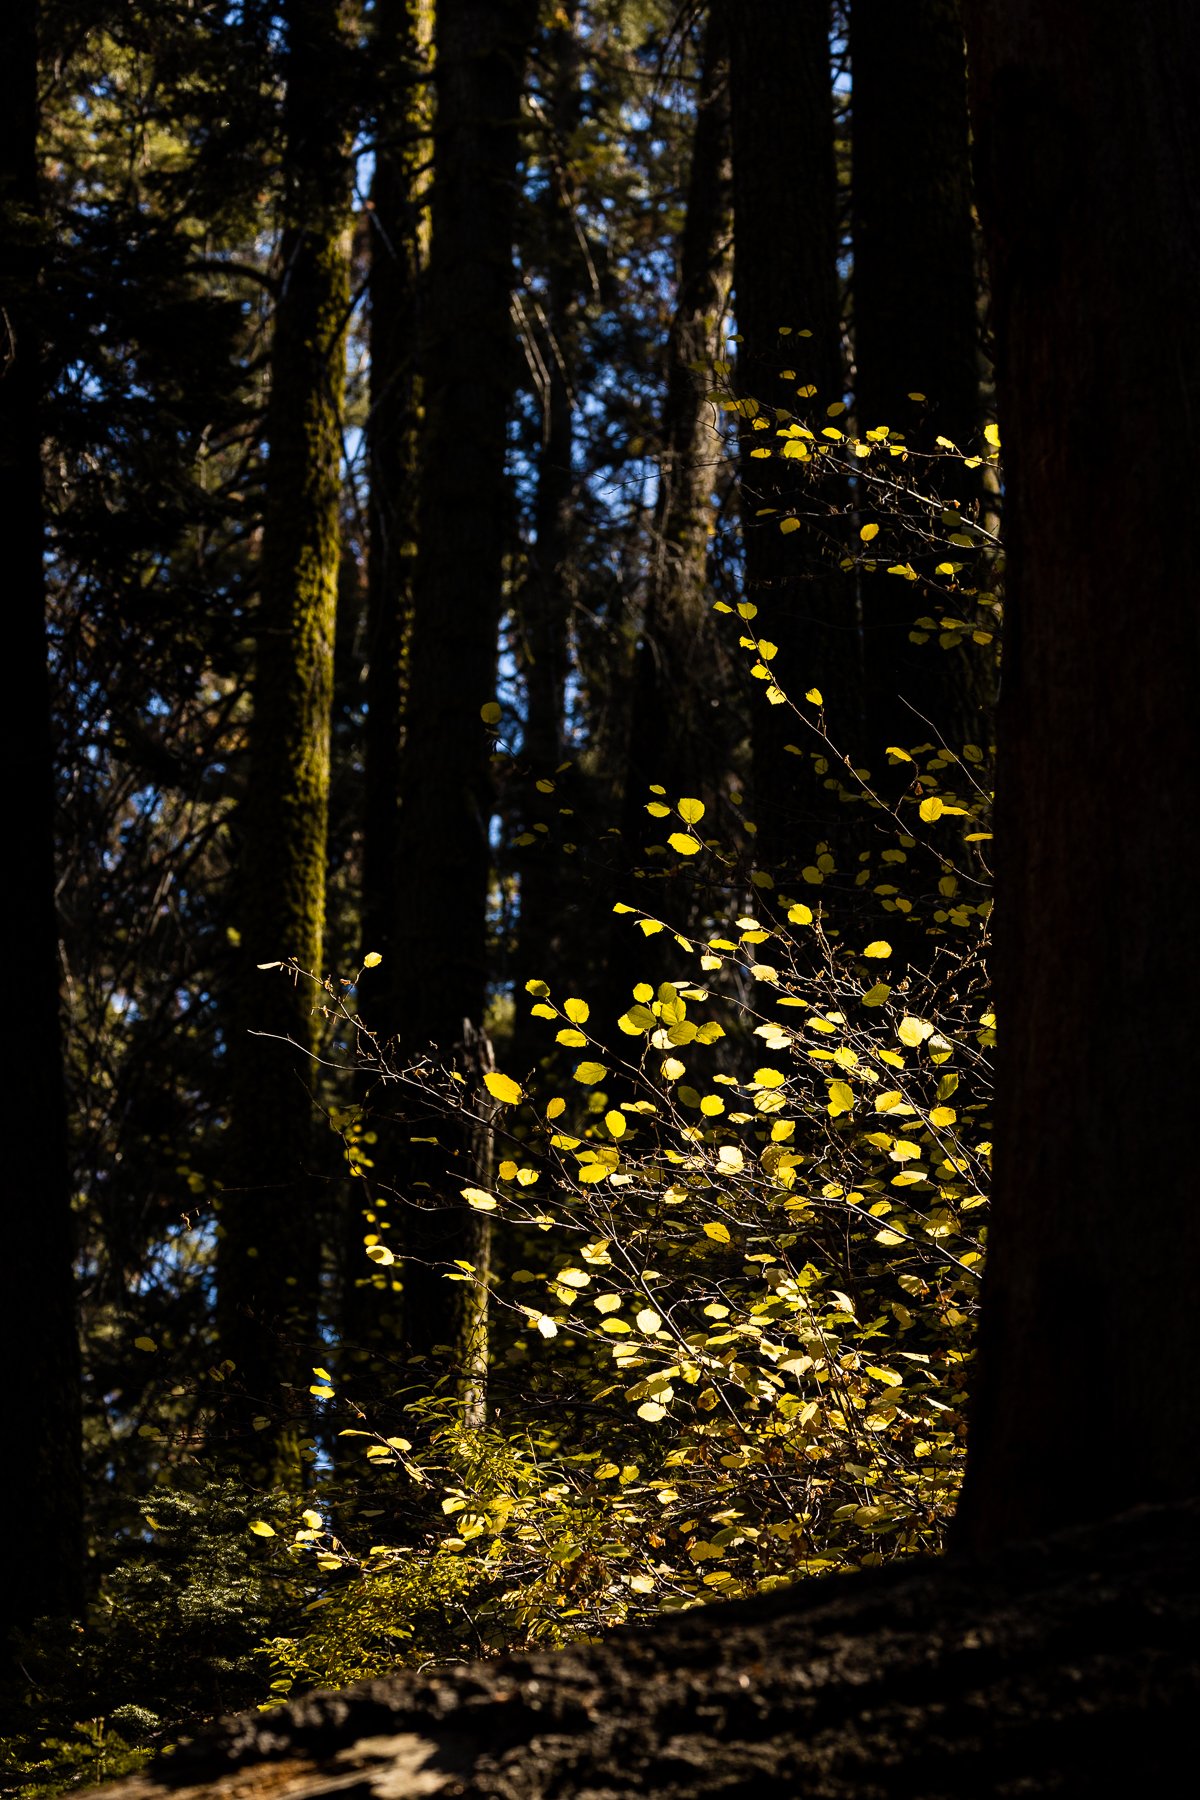 fall-light-yellow-leaves-leaf-peeping-sequoia-national-park-southern-california-leaves-autumn.jpg